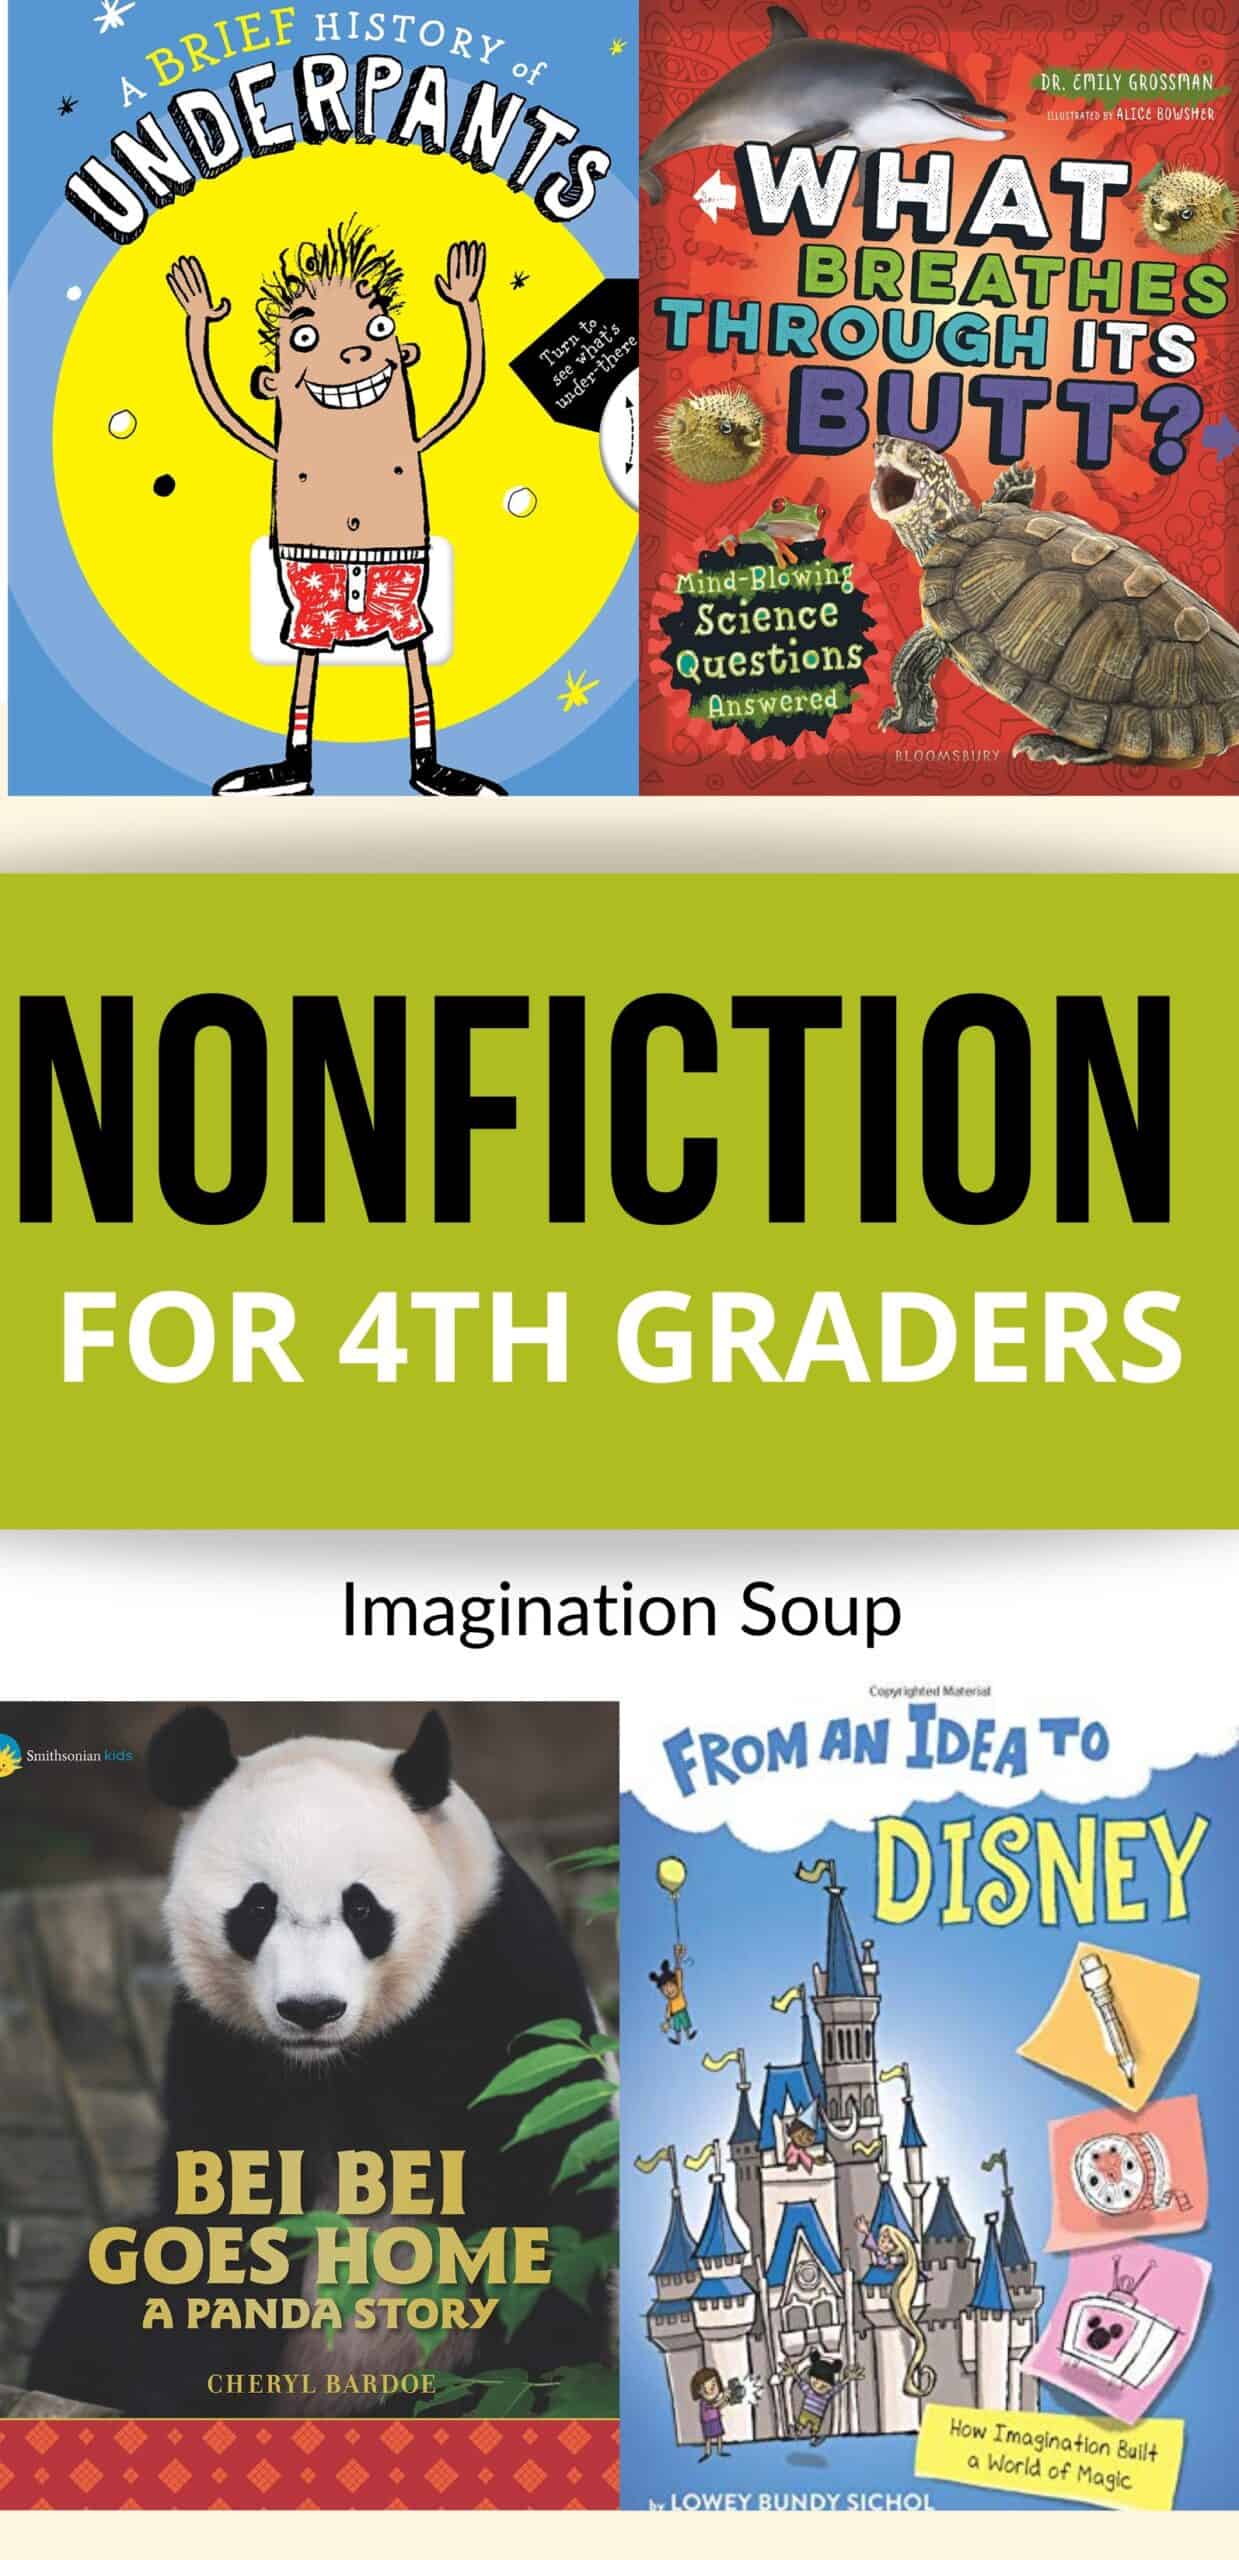 nonfiction books for 4th graders 9 year olds